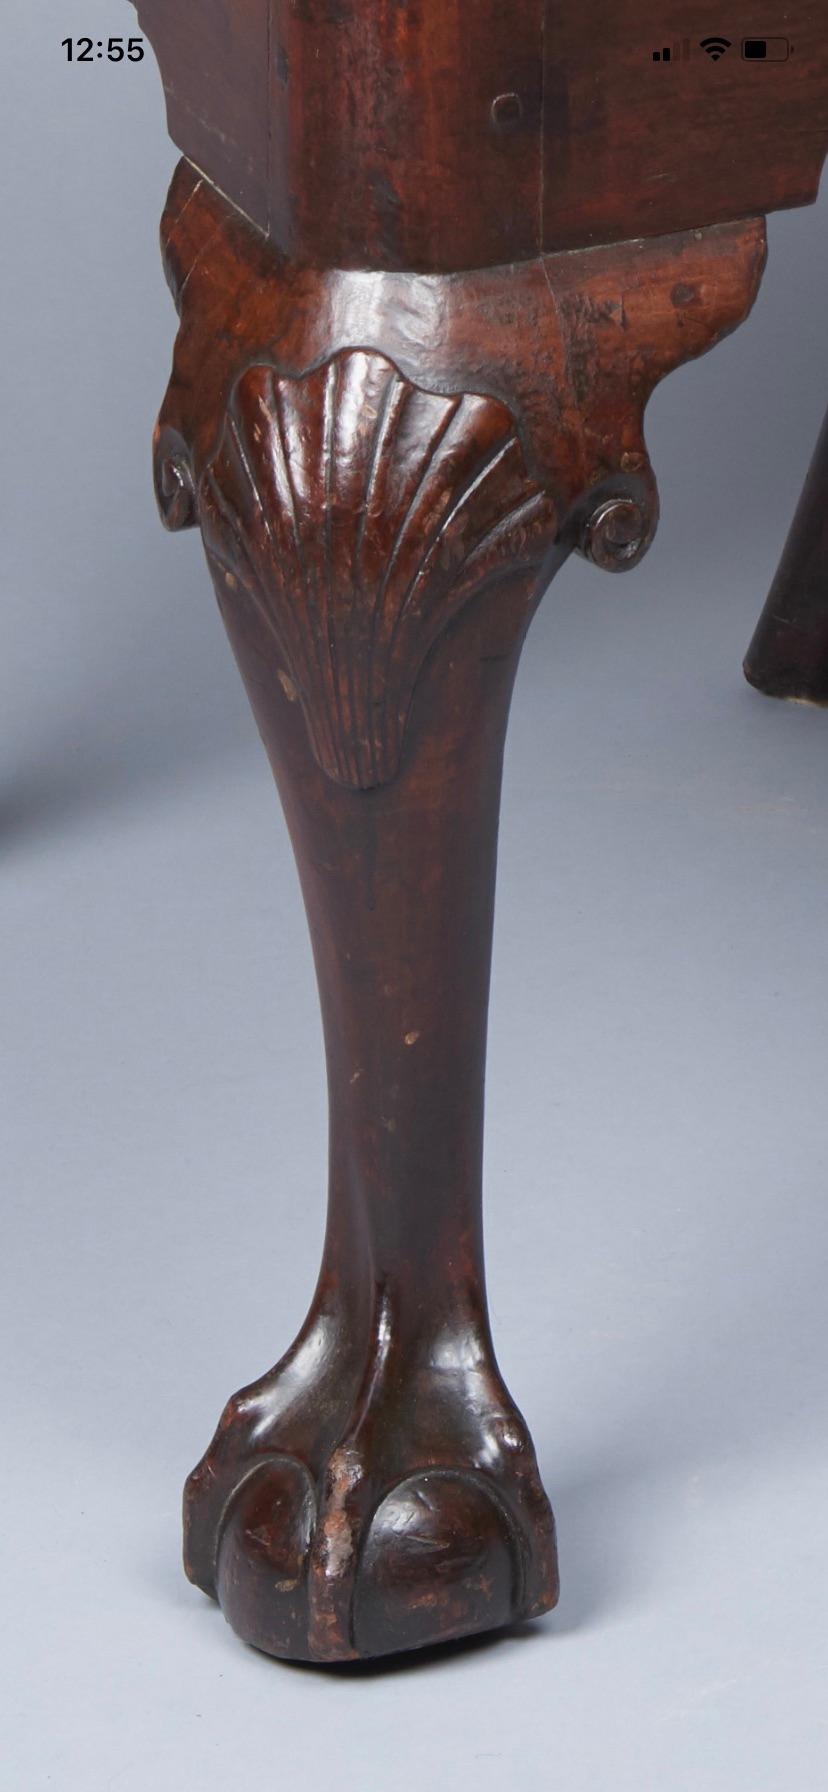 Crest rail with a shell and volutes, fluted stiles, pierced splat with volutes, shell on front rail, cabriole legs with shells terminating in claw and ball feet. Philadelphia, PA circa 1760-1775.